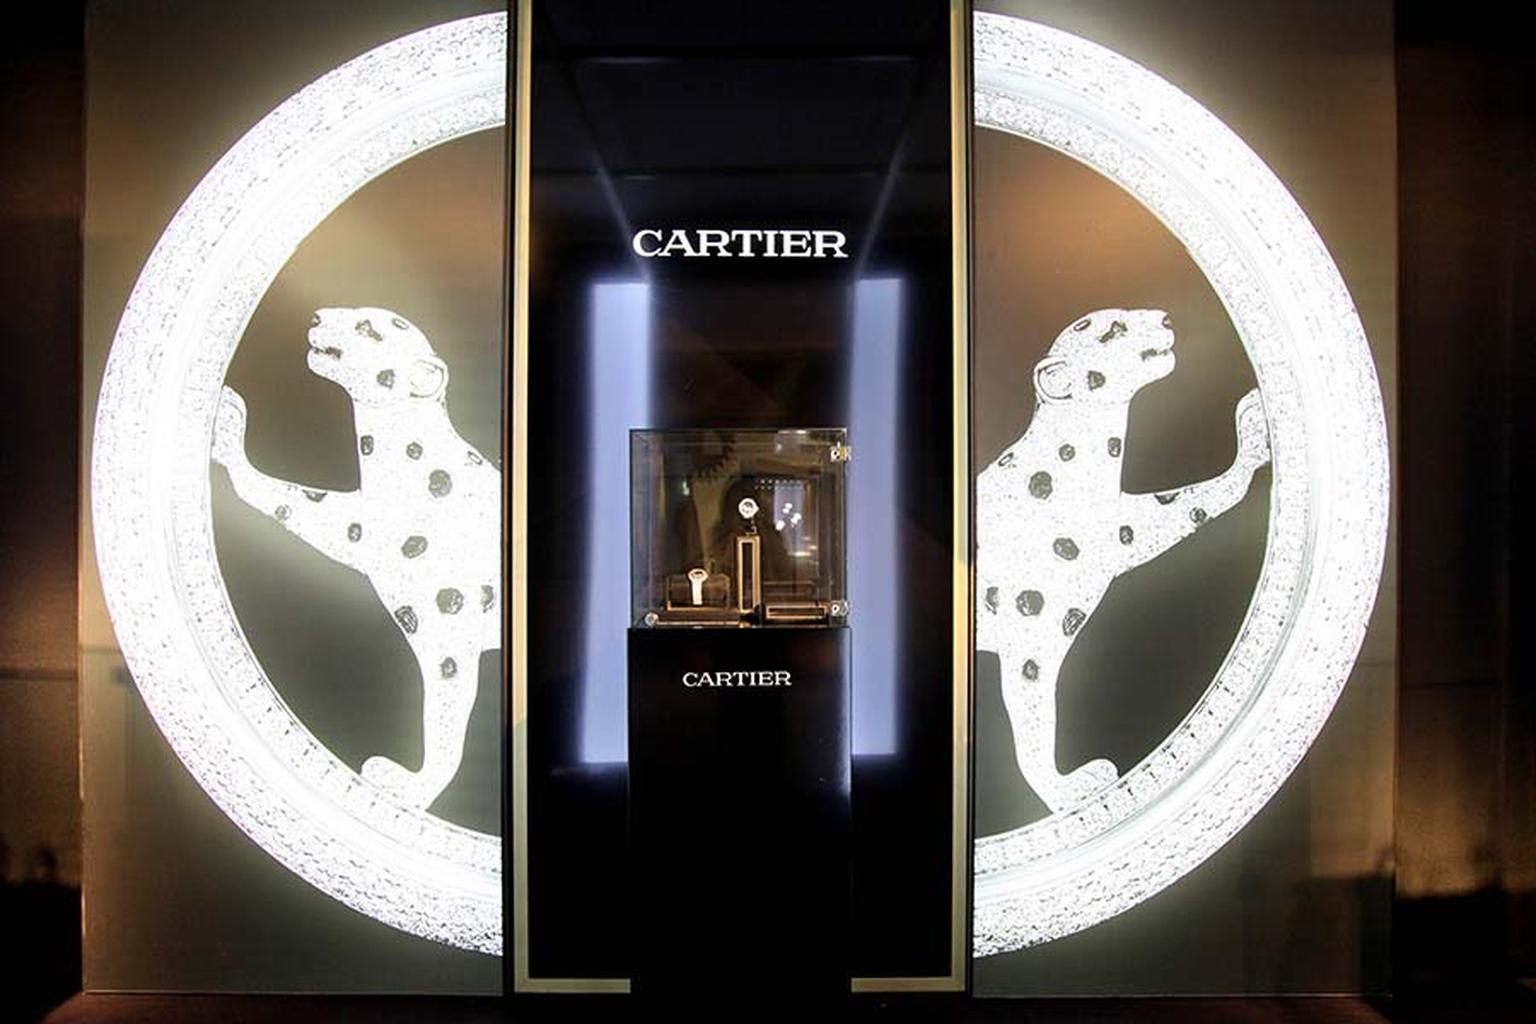 Cartier seduces at the SIAR in Madrid with a lavish display of watches and jewellery.